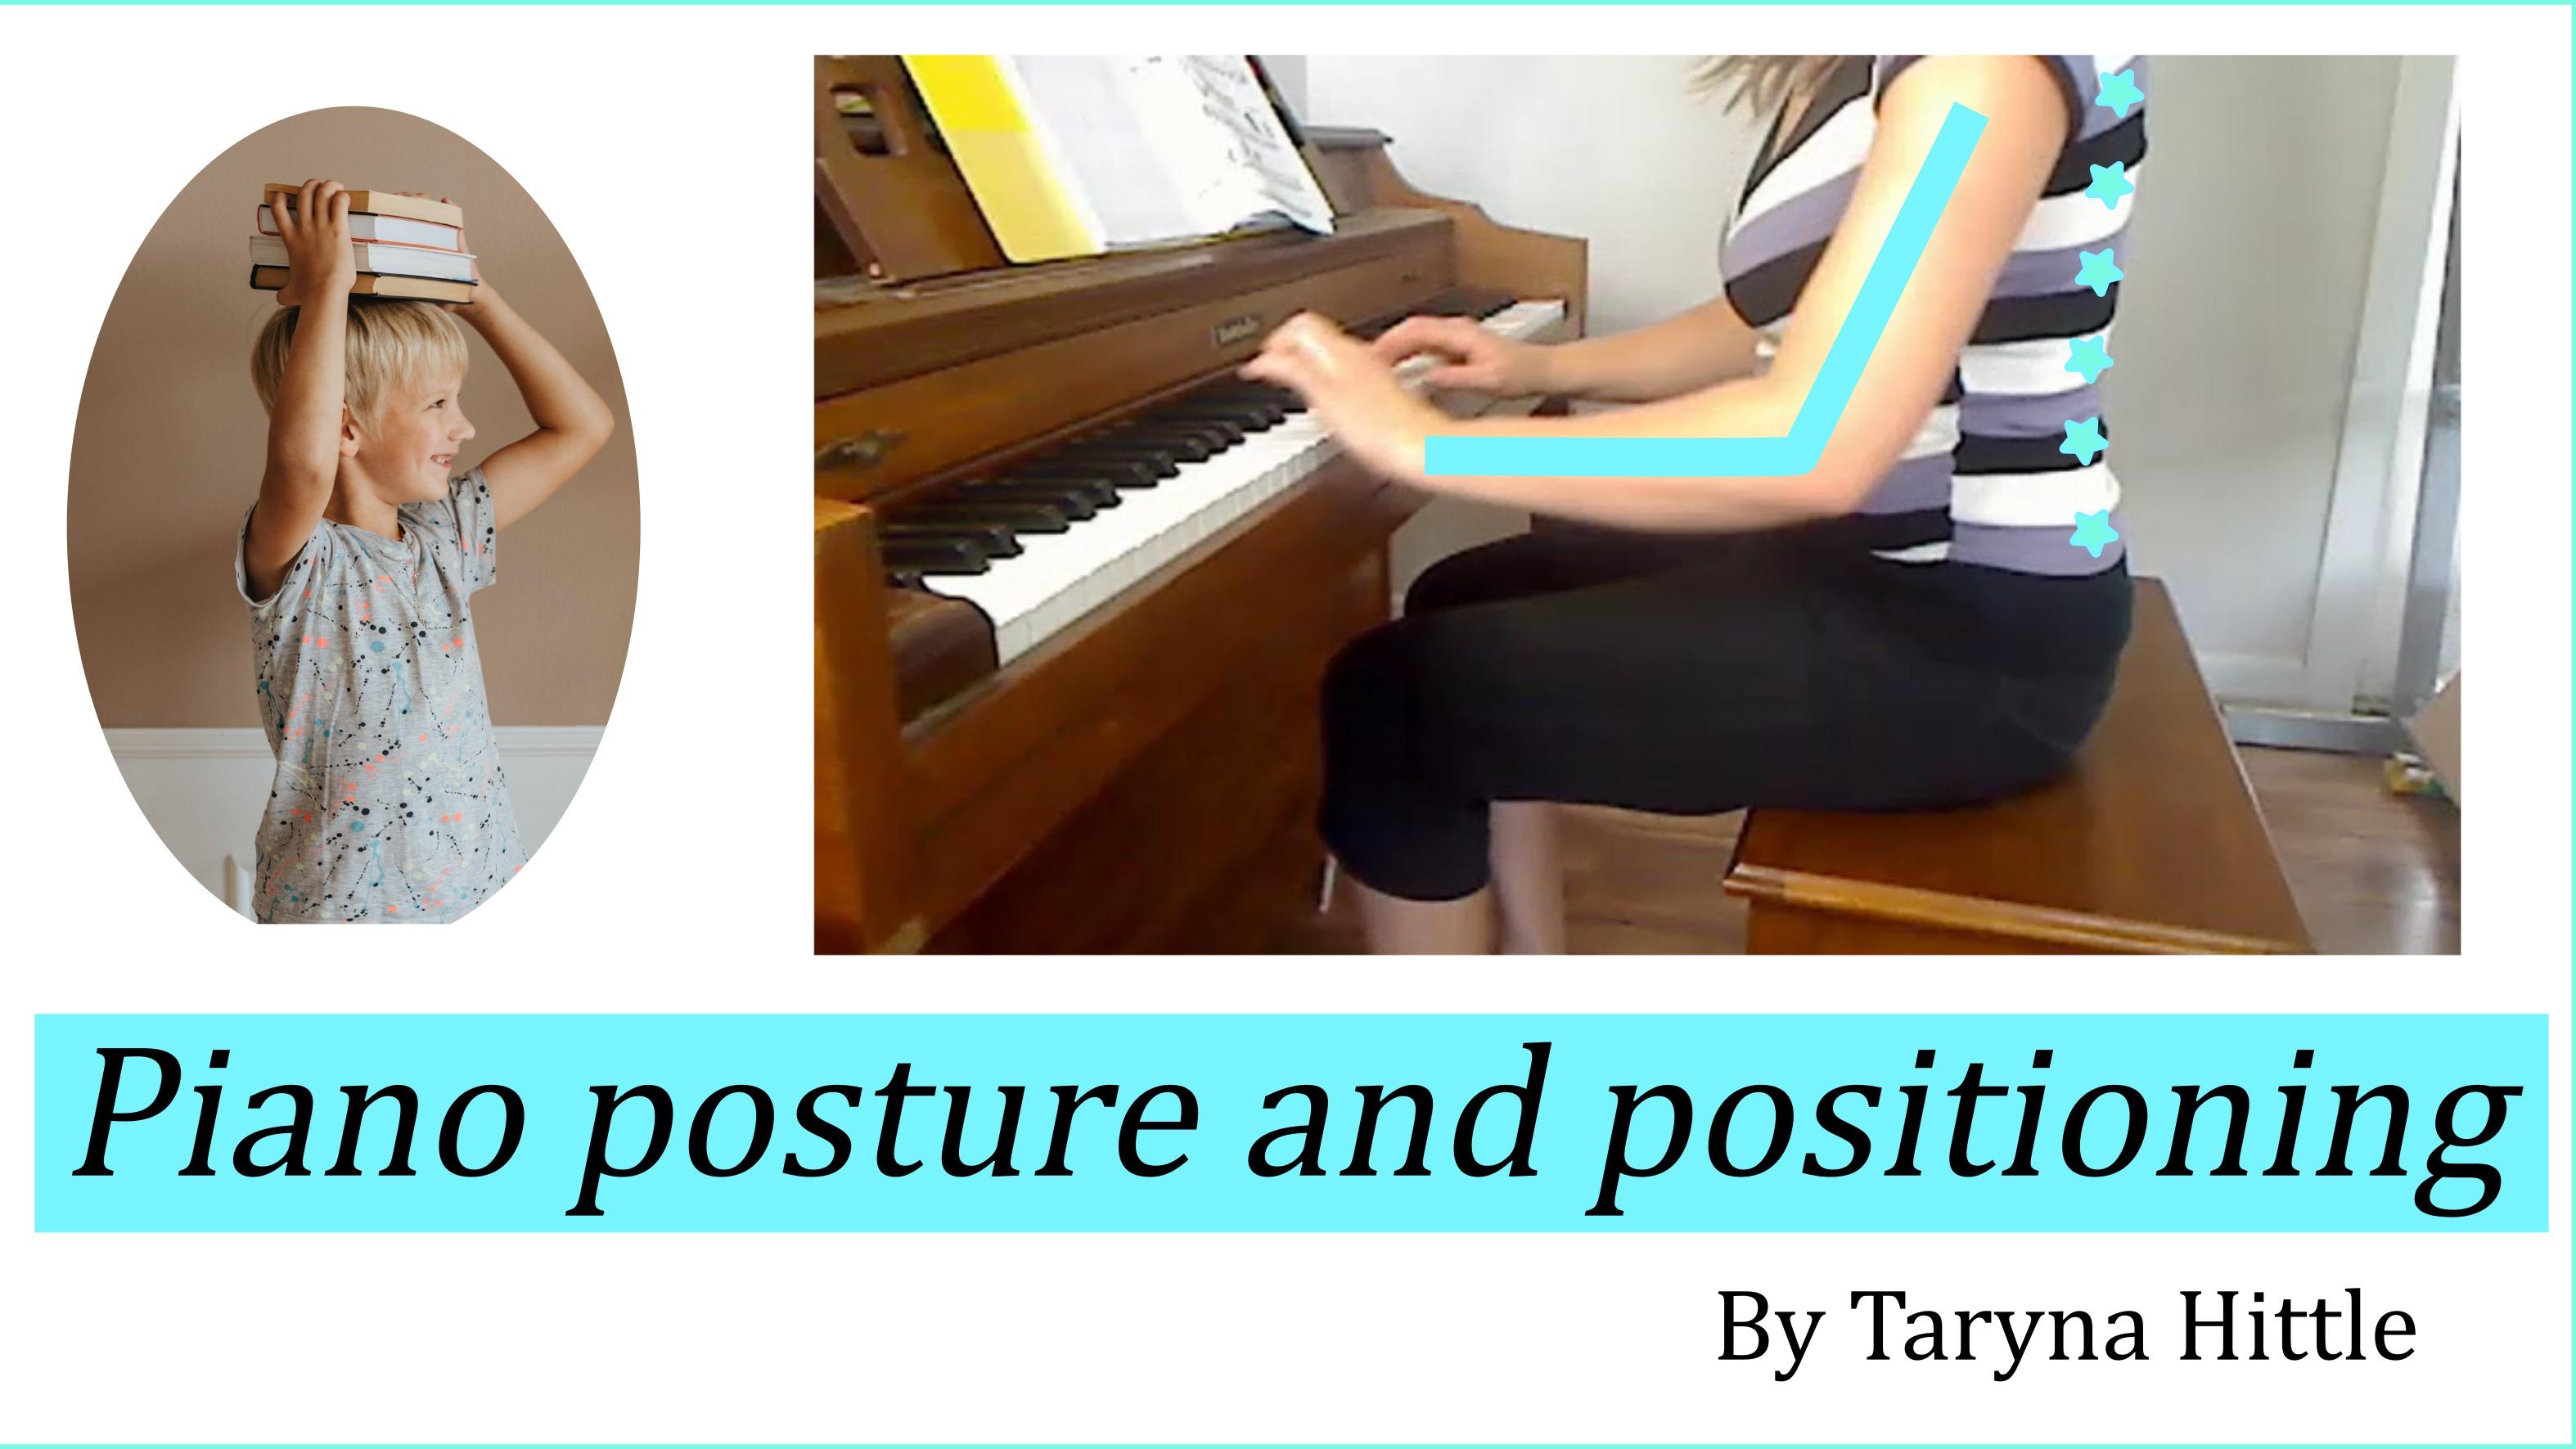 Proper piano posture and postioning